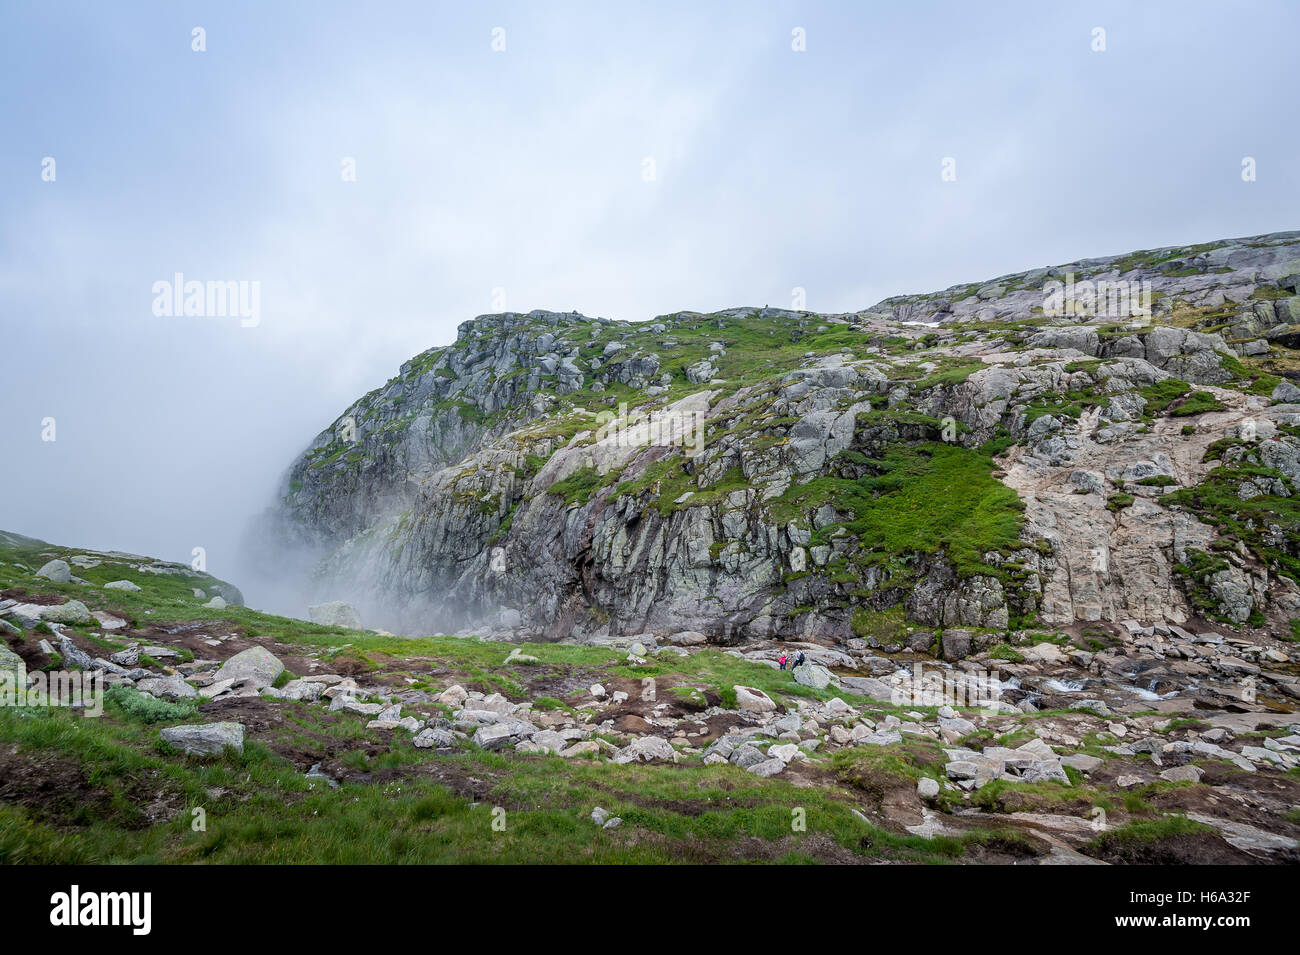 Tourists at the scenic landscape of Kjerag hiking path. Stock Photo